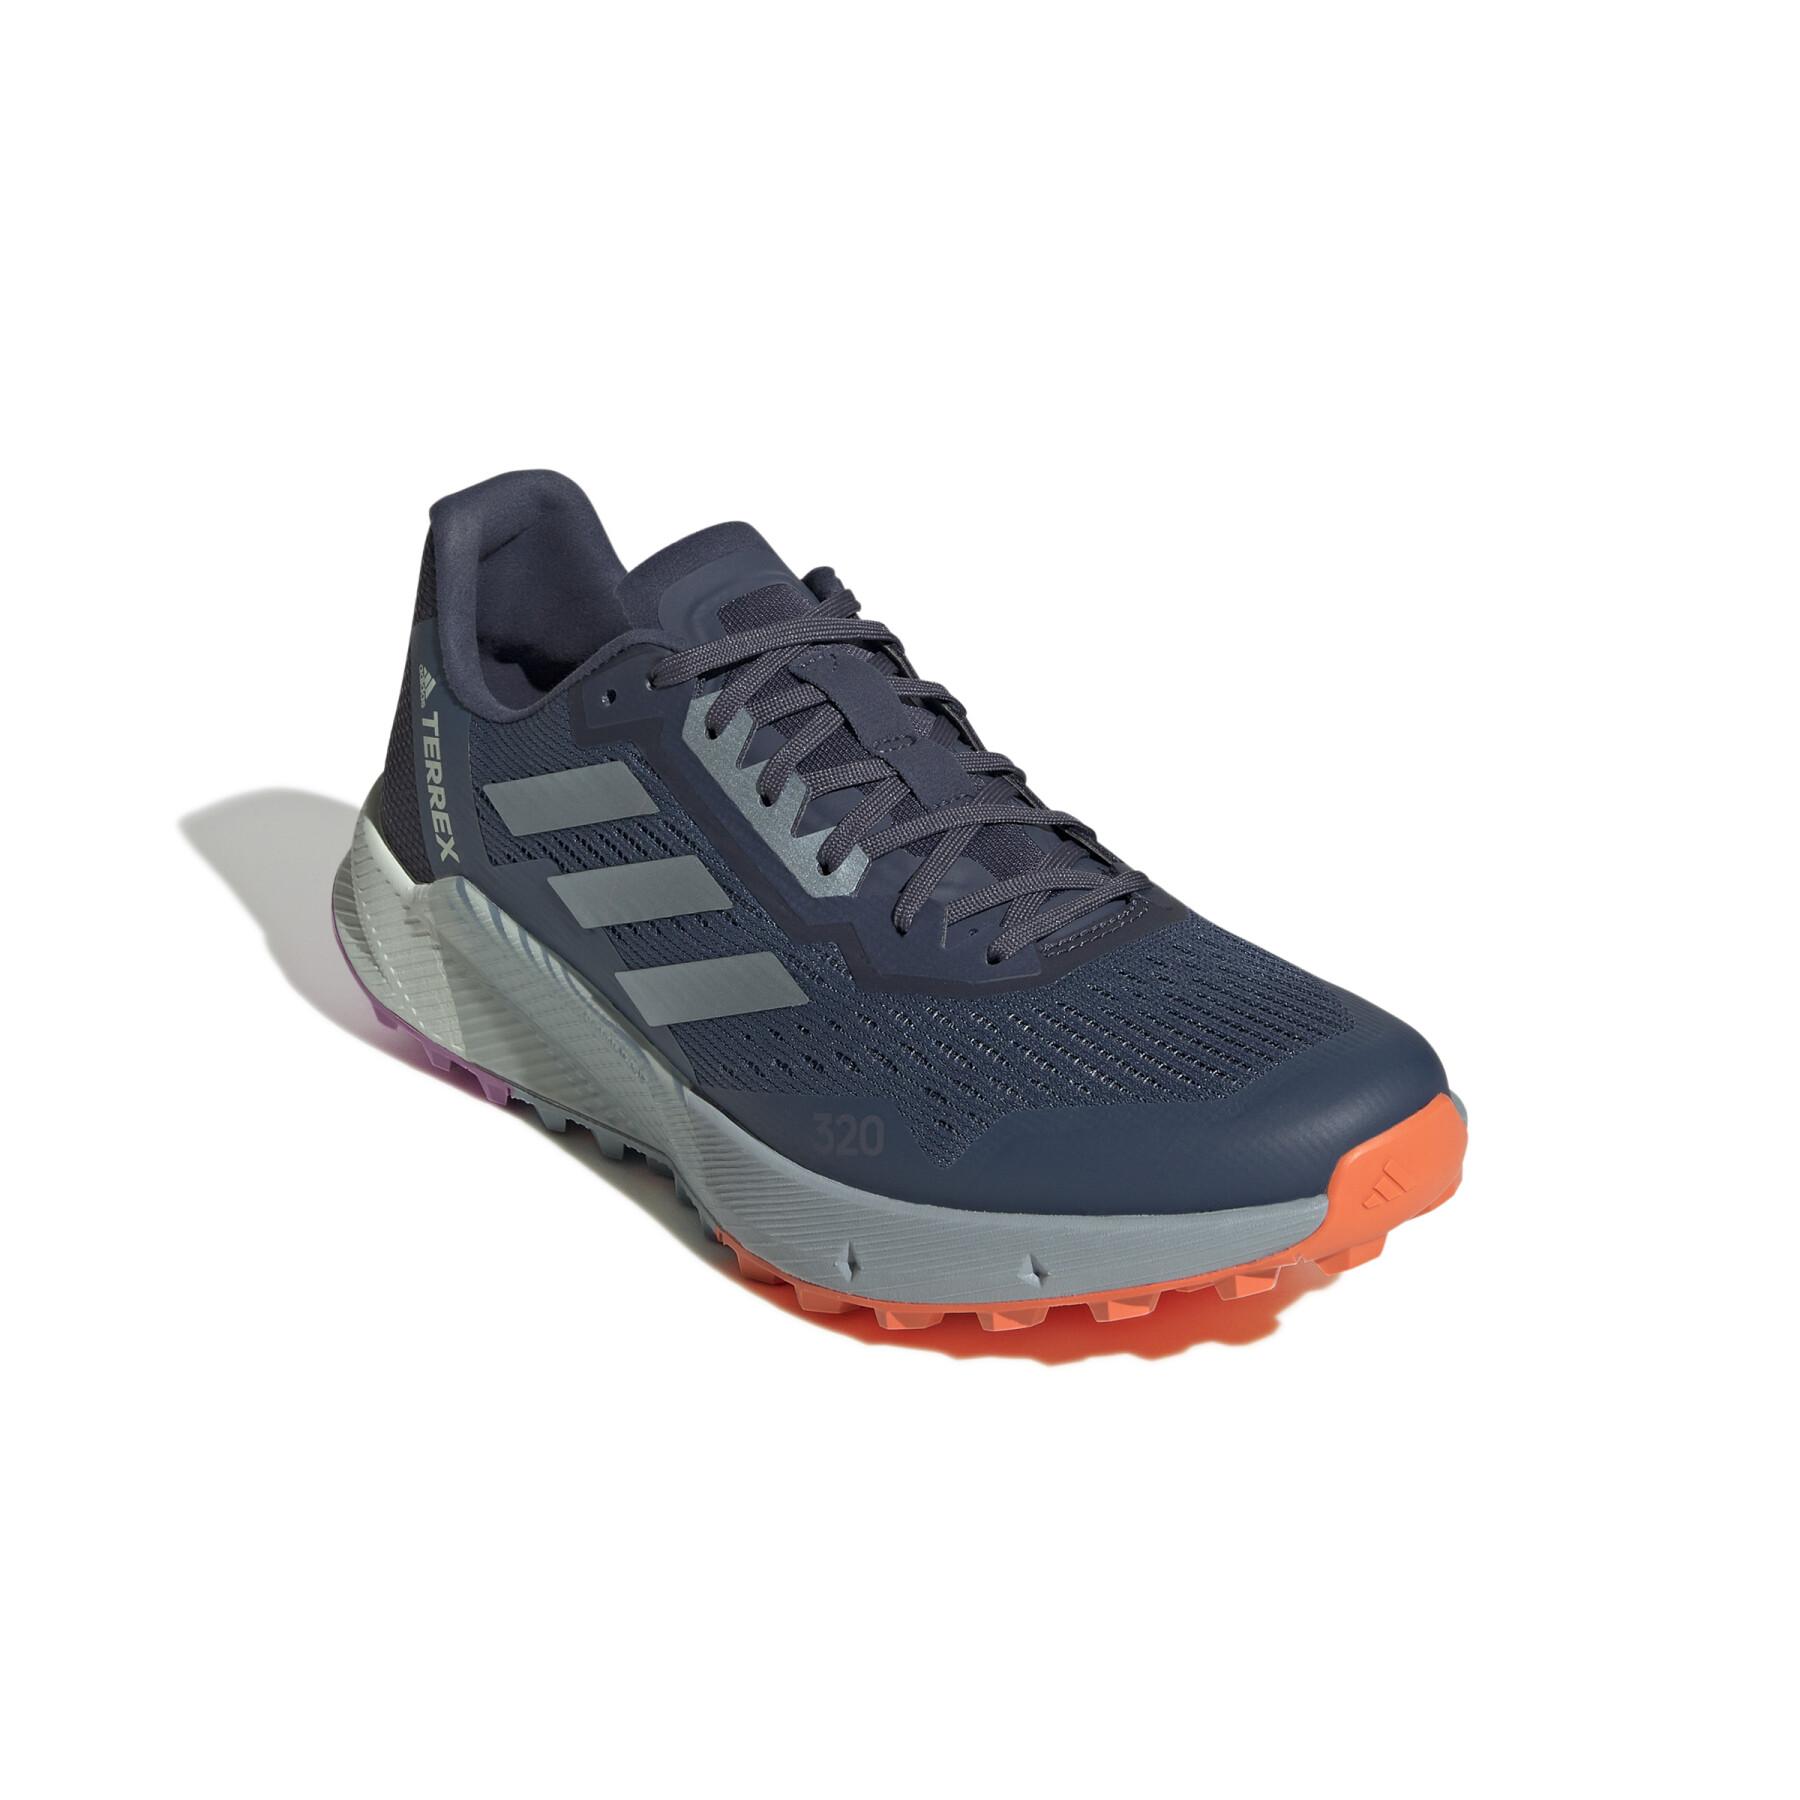 Trail running shoes adidas Terrex Agravic Flow 2 Trail